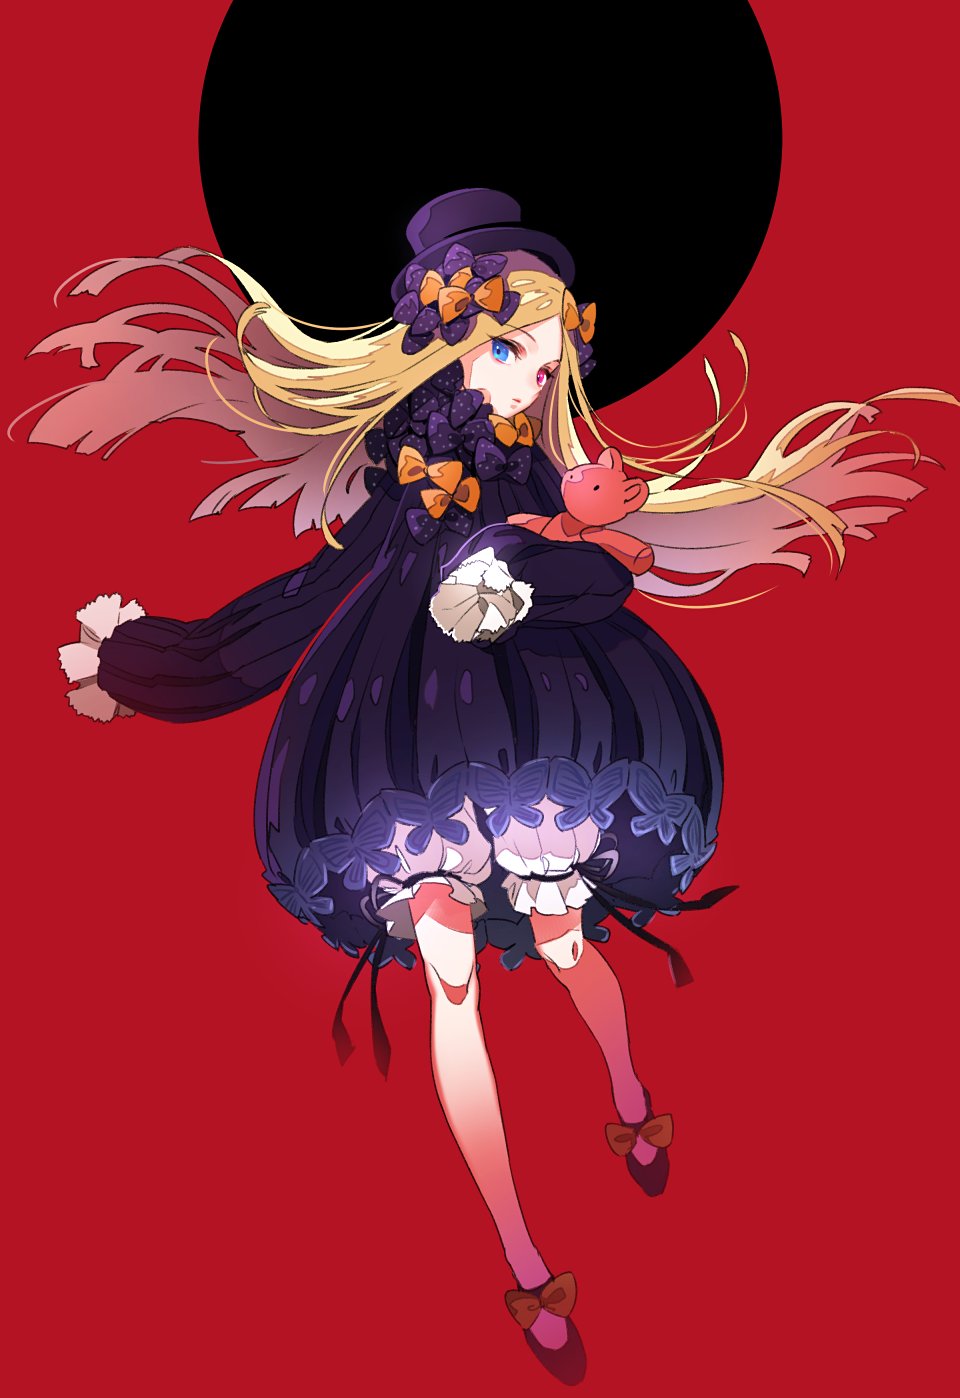 1girl abigail_williams_(fate/grand_order) blonde_hair blue_eyes bow bubble_skirt butterfly dress eyebrows_visible_through_hair fate/grand_order fate_(series) hair_bow hat heterochromia highres holding holding_stuffed_animal long_hair looking_at_viewer pink_eyes purple_dress purple_footwear purple_hat red_background shoes skirt solo stuffed_animal stuffed_toy teddy_bear too_many_bows top_hat two-tone_background very_long_sleeves yosi135